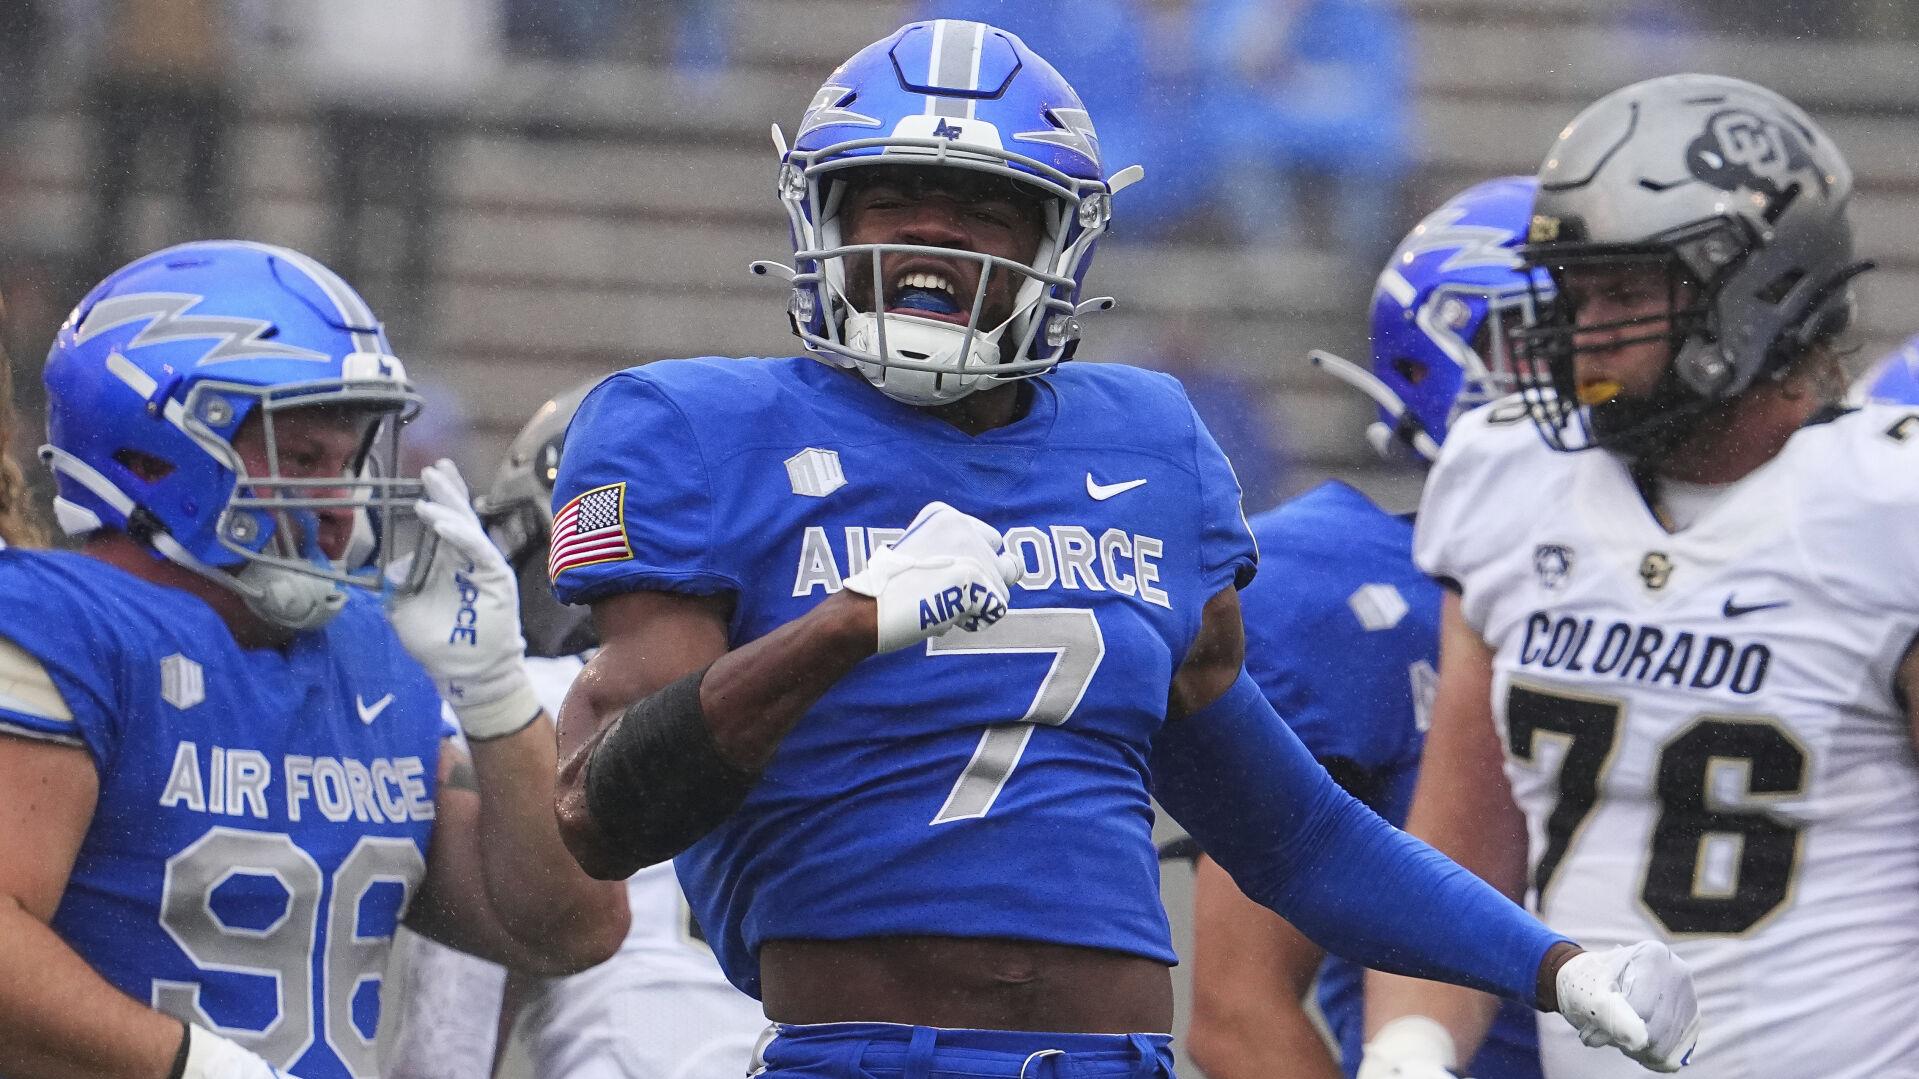 Air Force defensive back Trey Taylor is a playmaker and a solid prospect. Ryan Vidales of the Hula Bowl breaks down his film for this 2024 scouting report.